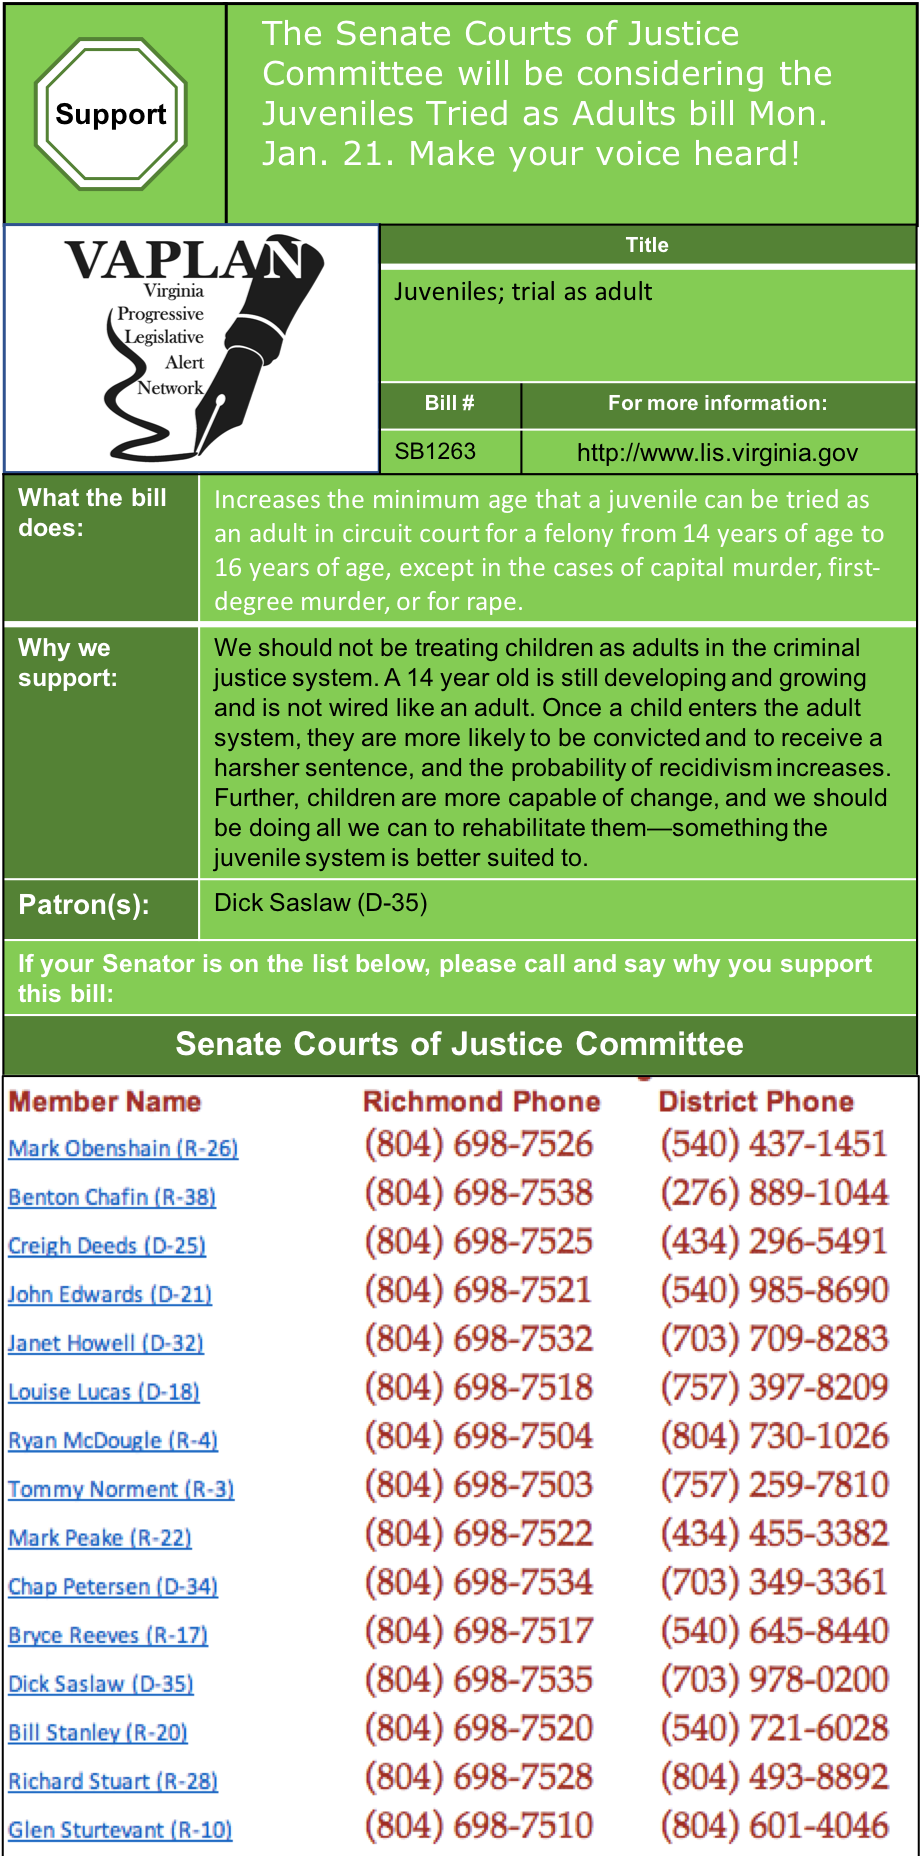 UPDATE: Raise Age at Which Children Tried as Adults to 16 in Senate Courts of Justice Mon. Jan. 28!